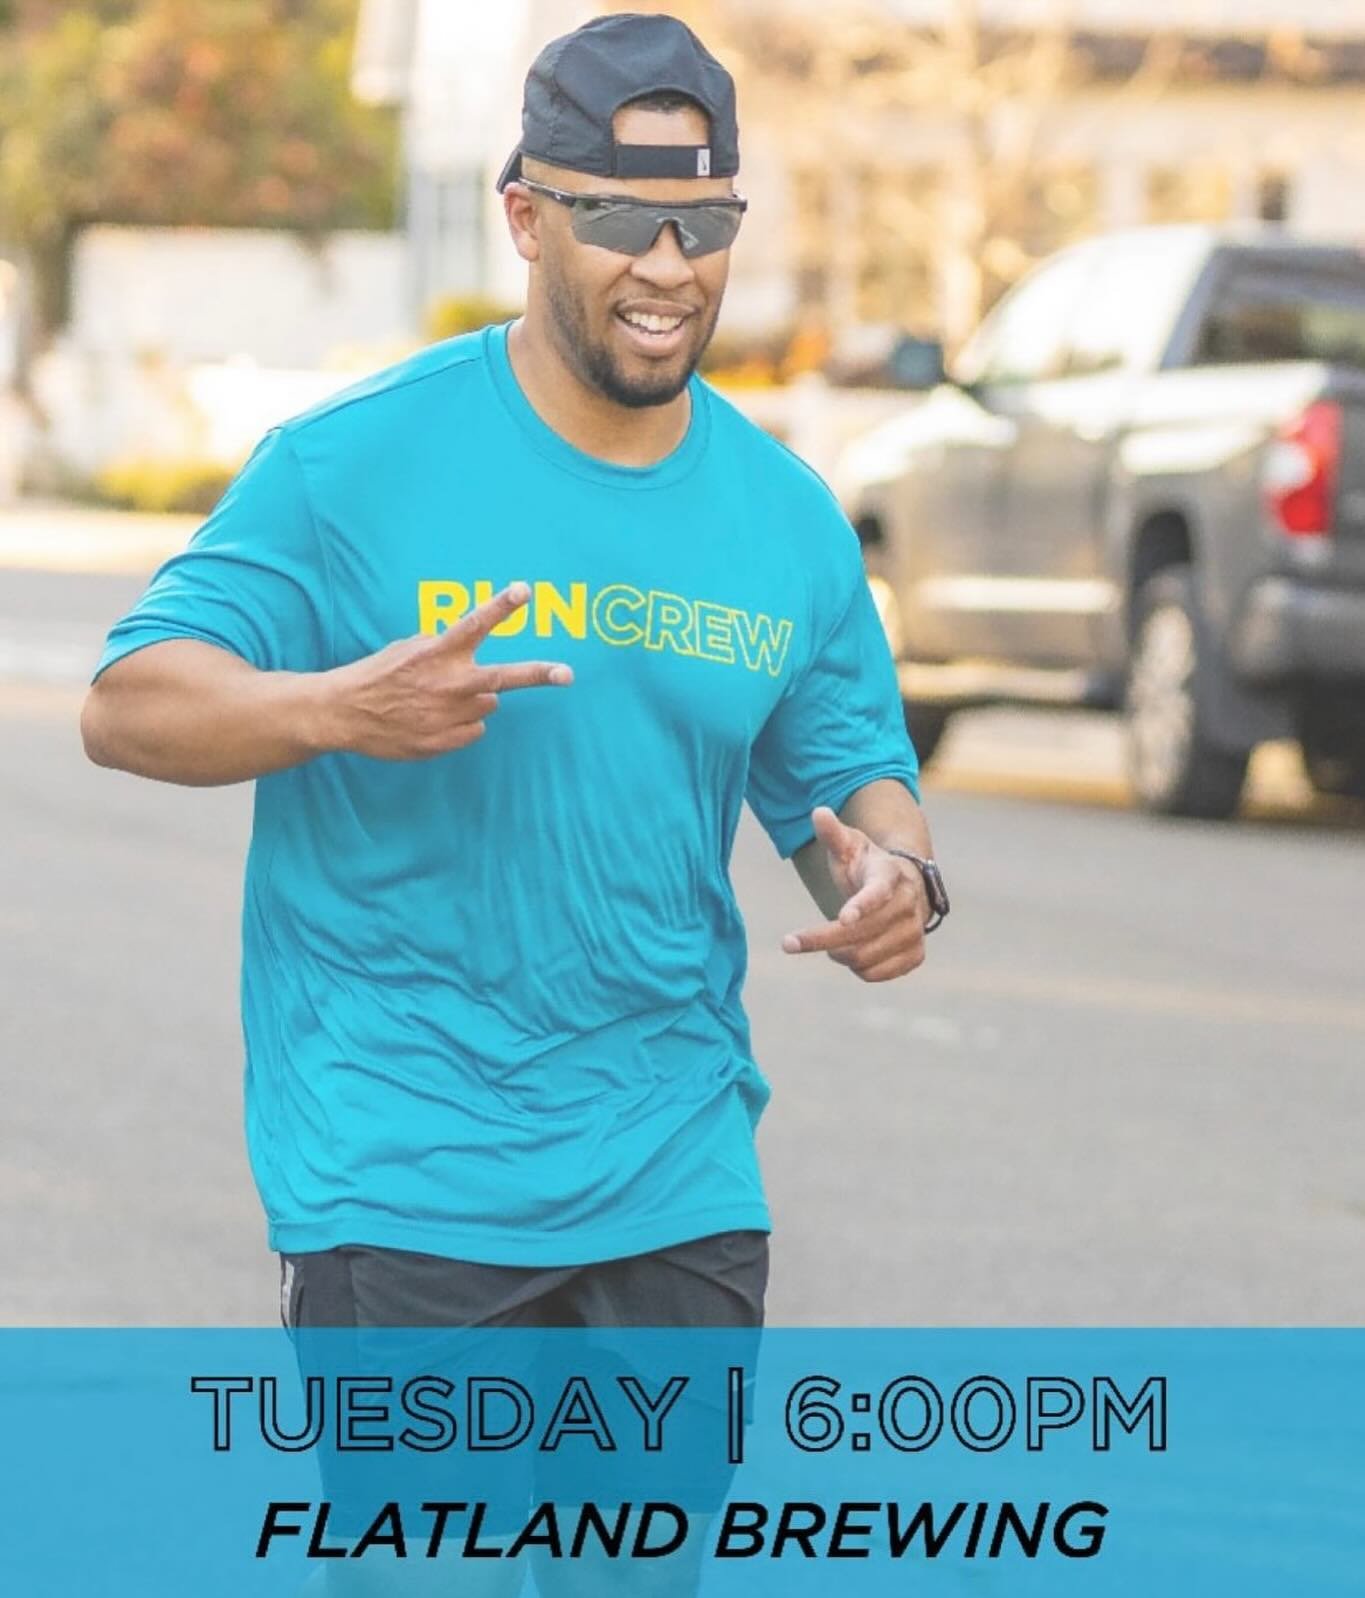 Every Tuesday @fleetfeetelkgrove hosts Run Crew right here at out little ole brewery. 🙌 It starts at 6pm. It&rsquo;s free and open to all runners/walkers. 🏃🏃&zwj;♀️🏃&zwj;♂️ Sometimes there&rsquo;s even demos with their partners&hellip;Today, they